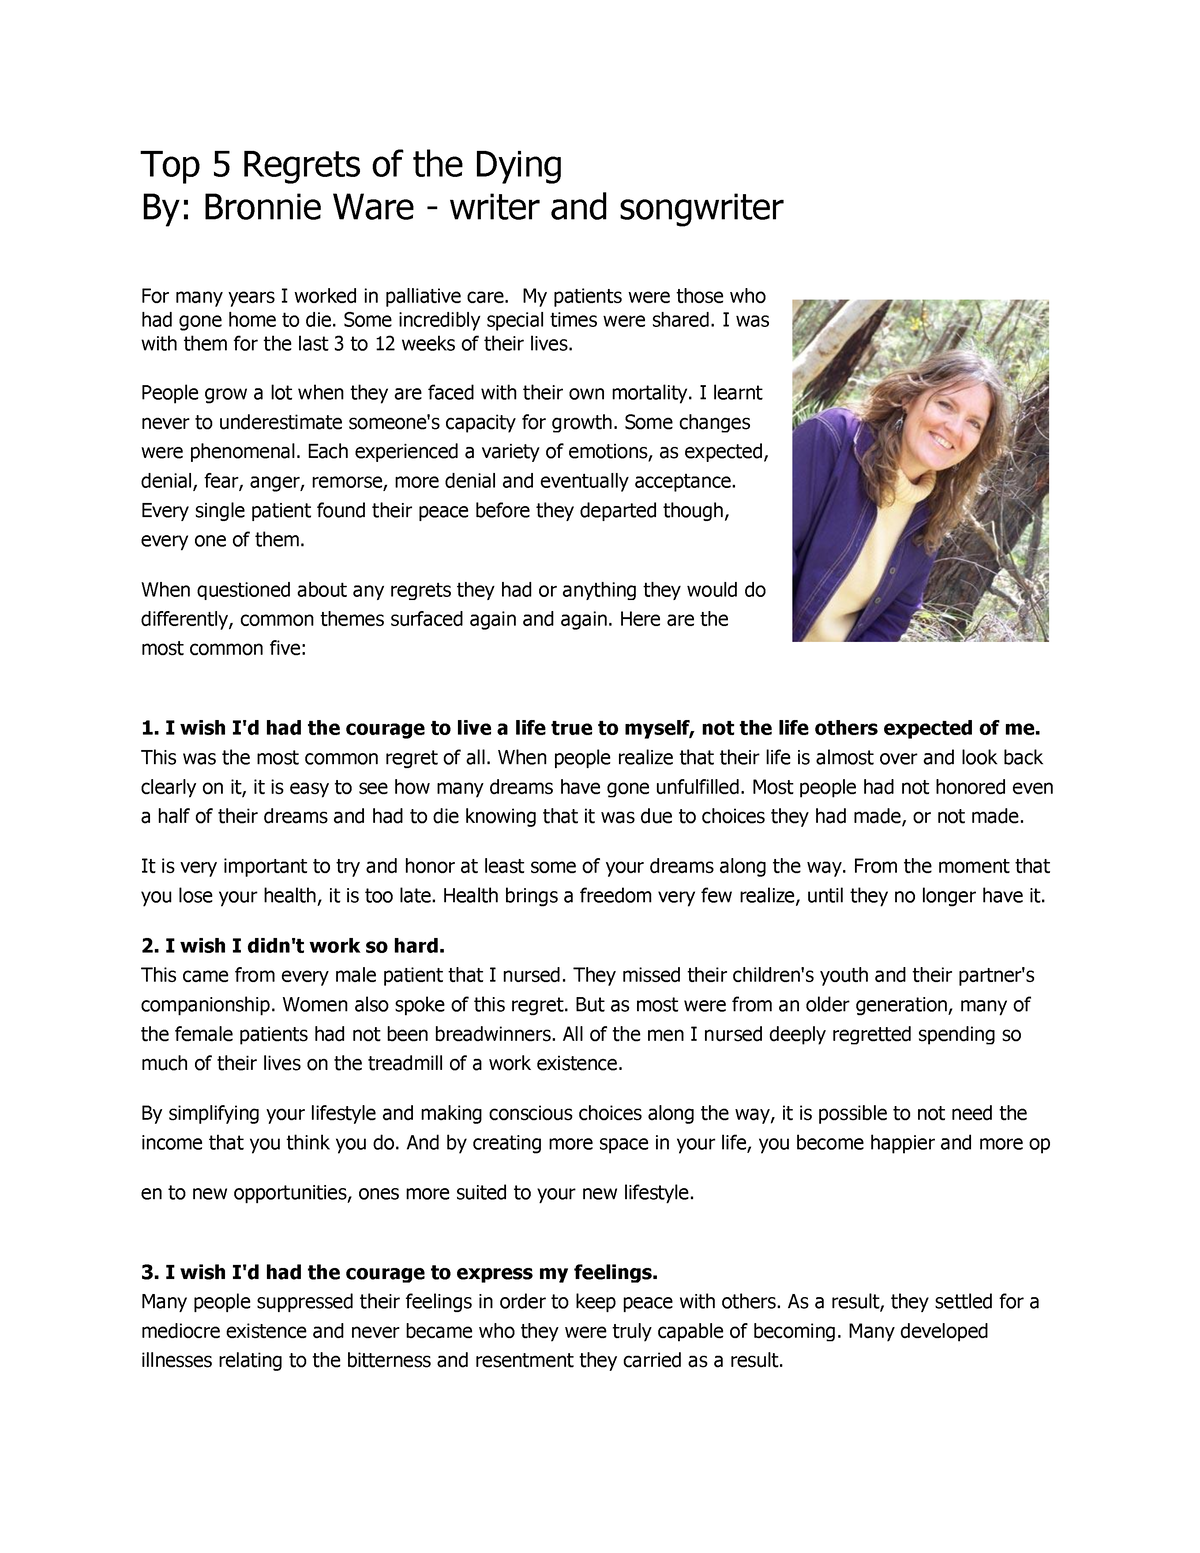 Top 5 Regrets Of The Dying Top 5 Regrets Of The Dying By Bronnie Ware Writer And Songwriter